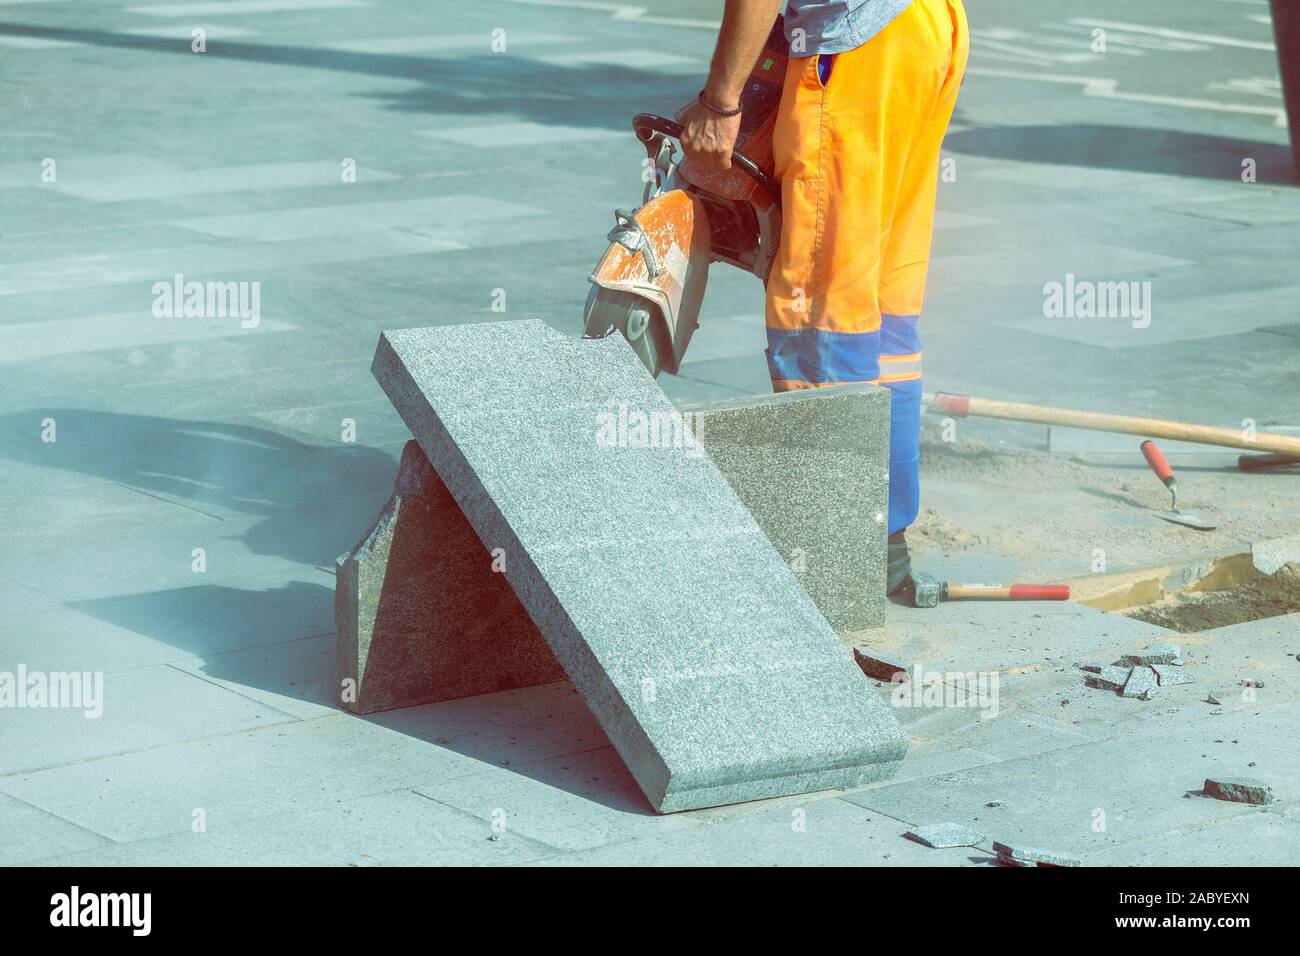 Man cutting paving slab with circular saw for repairing the walkway. Stock Photo